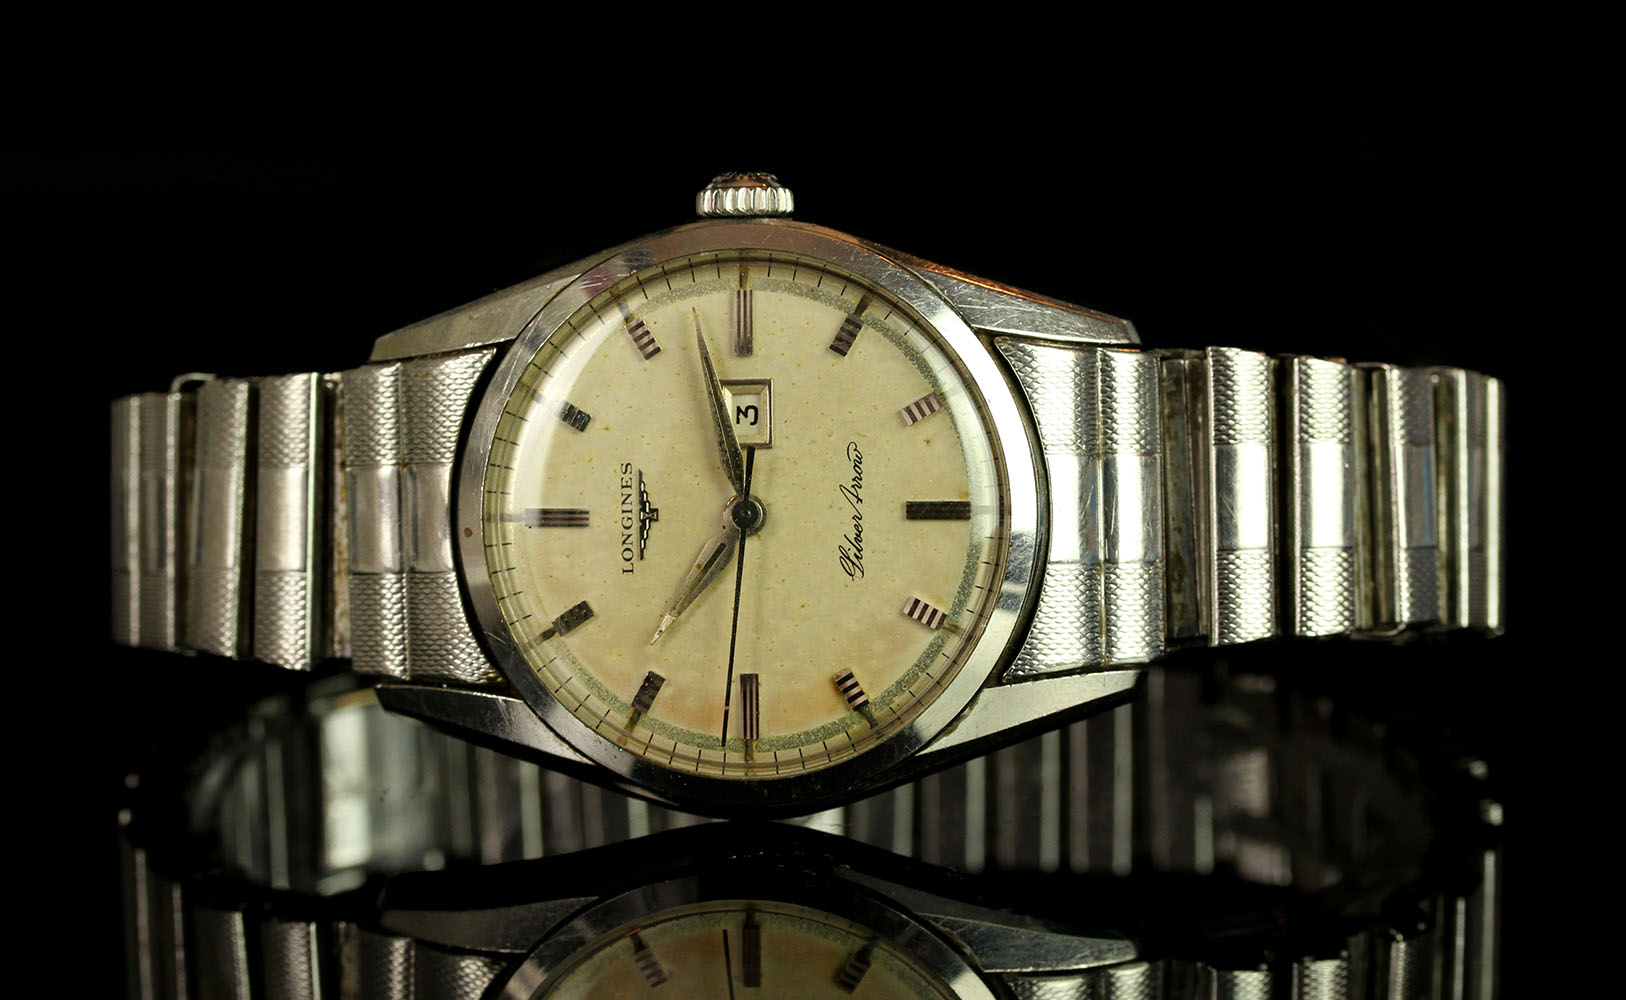 GENTLEMENS LONGINES SILVER ARROW WRISTWATCH, circular silver dial with hour markers, date at 3 0'